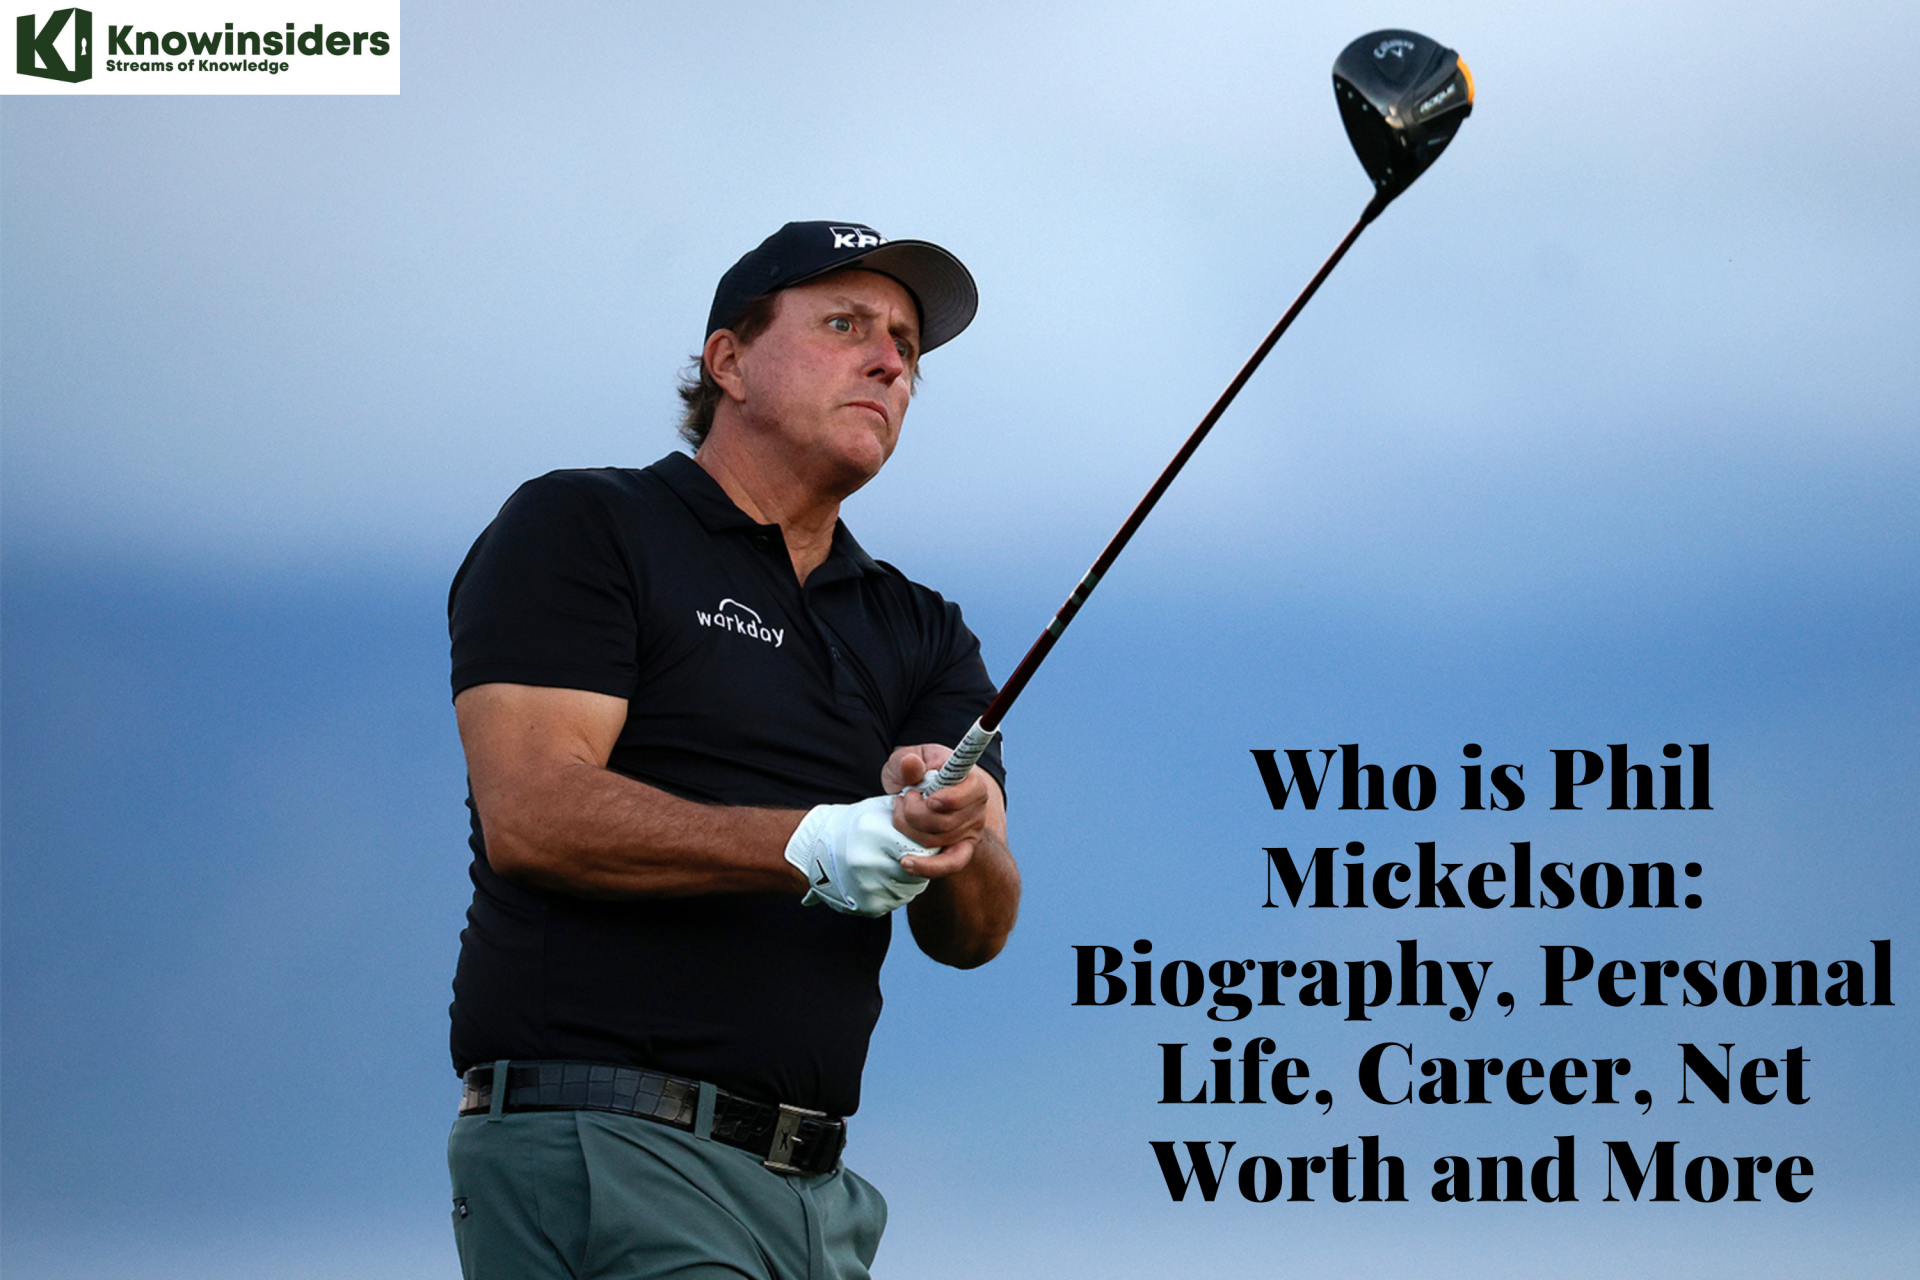 Who is Phil Mickelson: Biography, Personal Life, Career, Net Worth and More